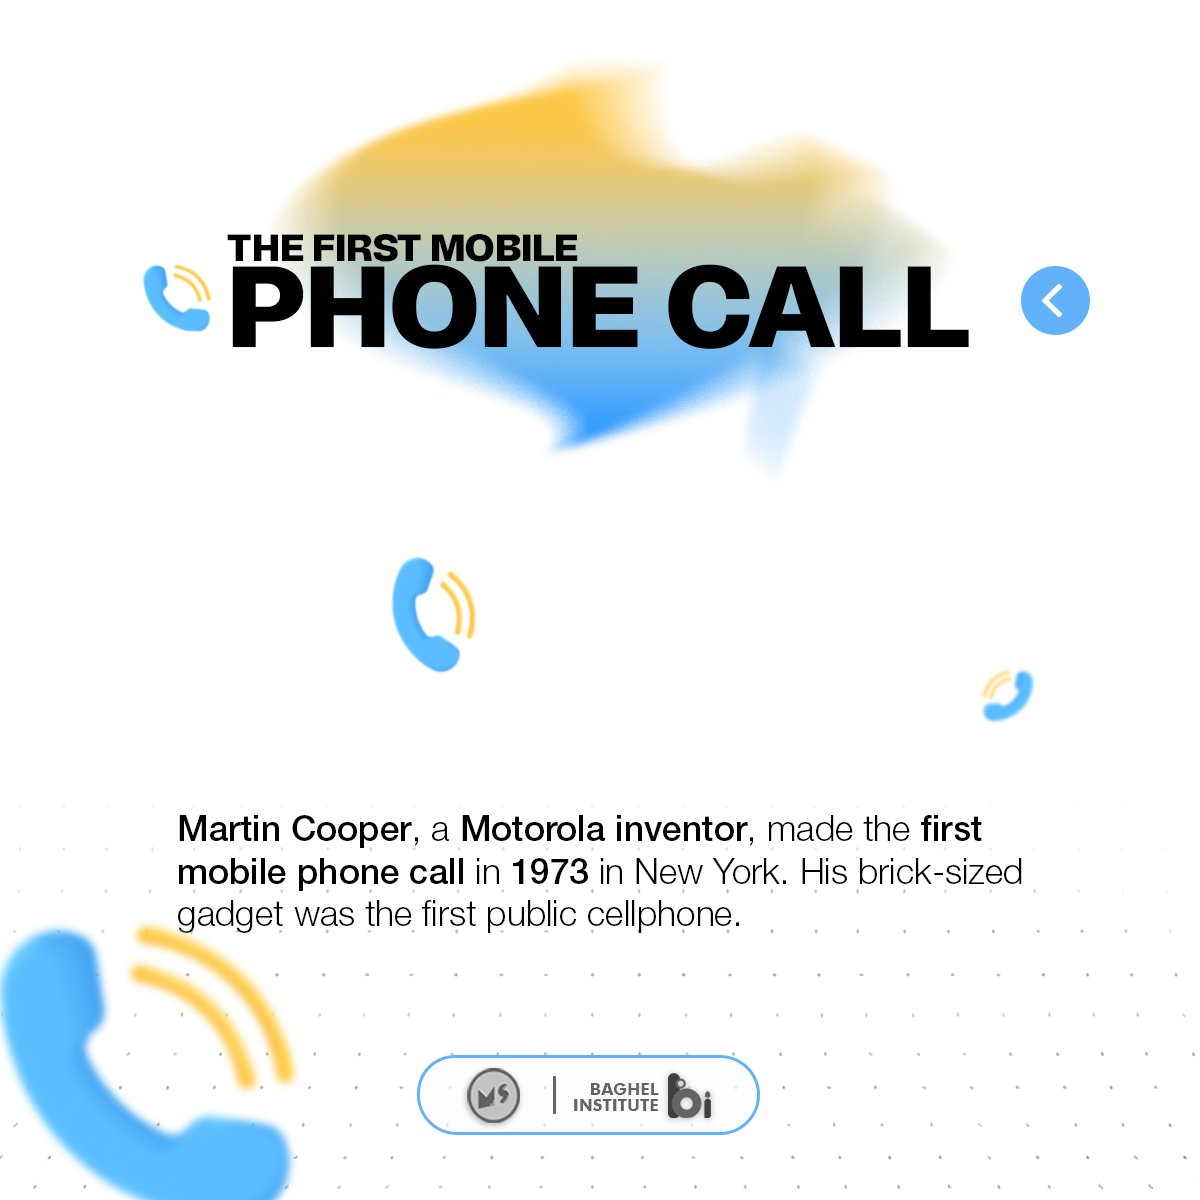 MARTIN COOPER , made the first mobile phone call in 1973 !!!!!
#FirstCallFacts #DidYouKnow #FunFacts #PhoneTrivia #TelecomFacts #PhoneHistory #CallFacts #History #EducateYourself #InterestingFacts #FactsOnly #study #boostyourknowledge #learn #baghelcomputercentre #miniatureschool